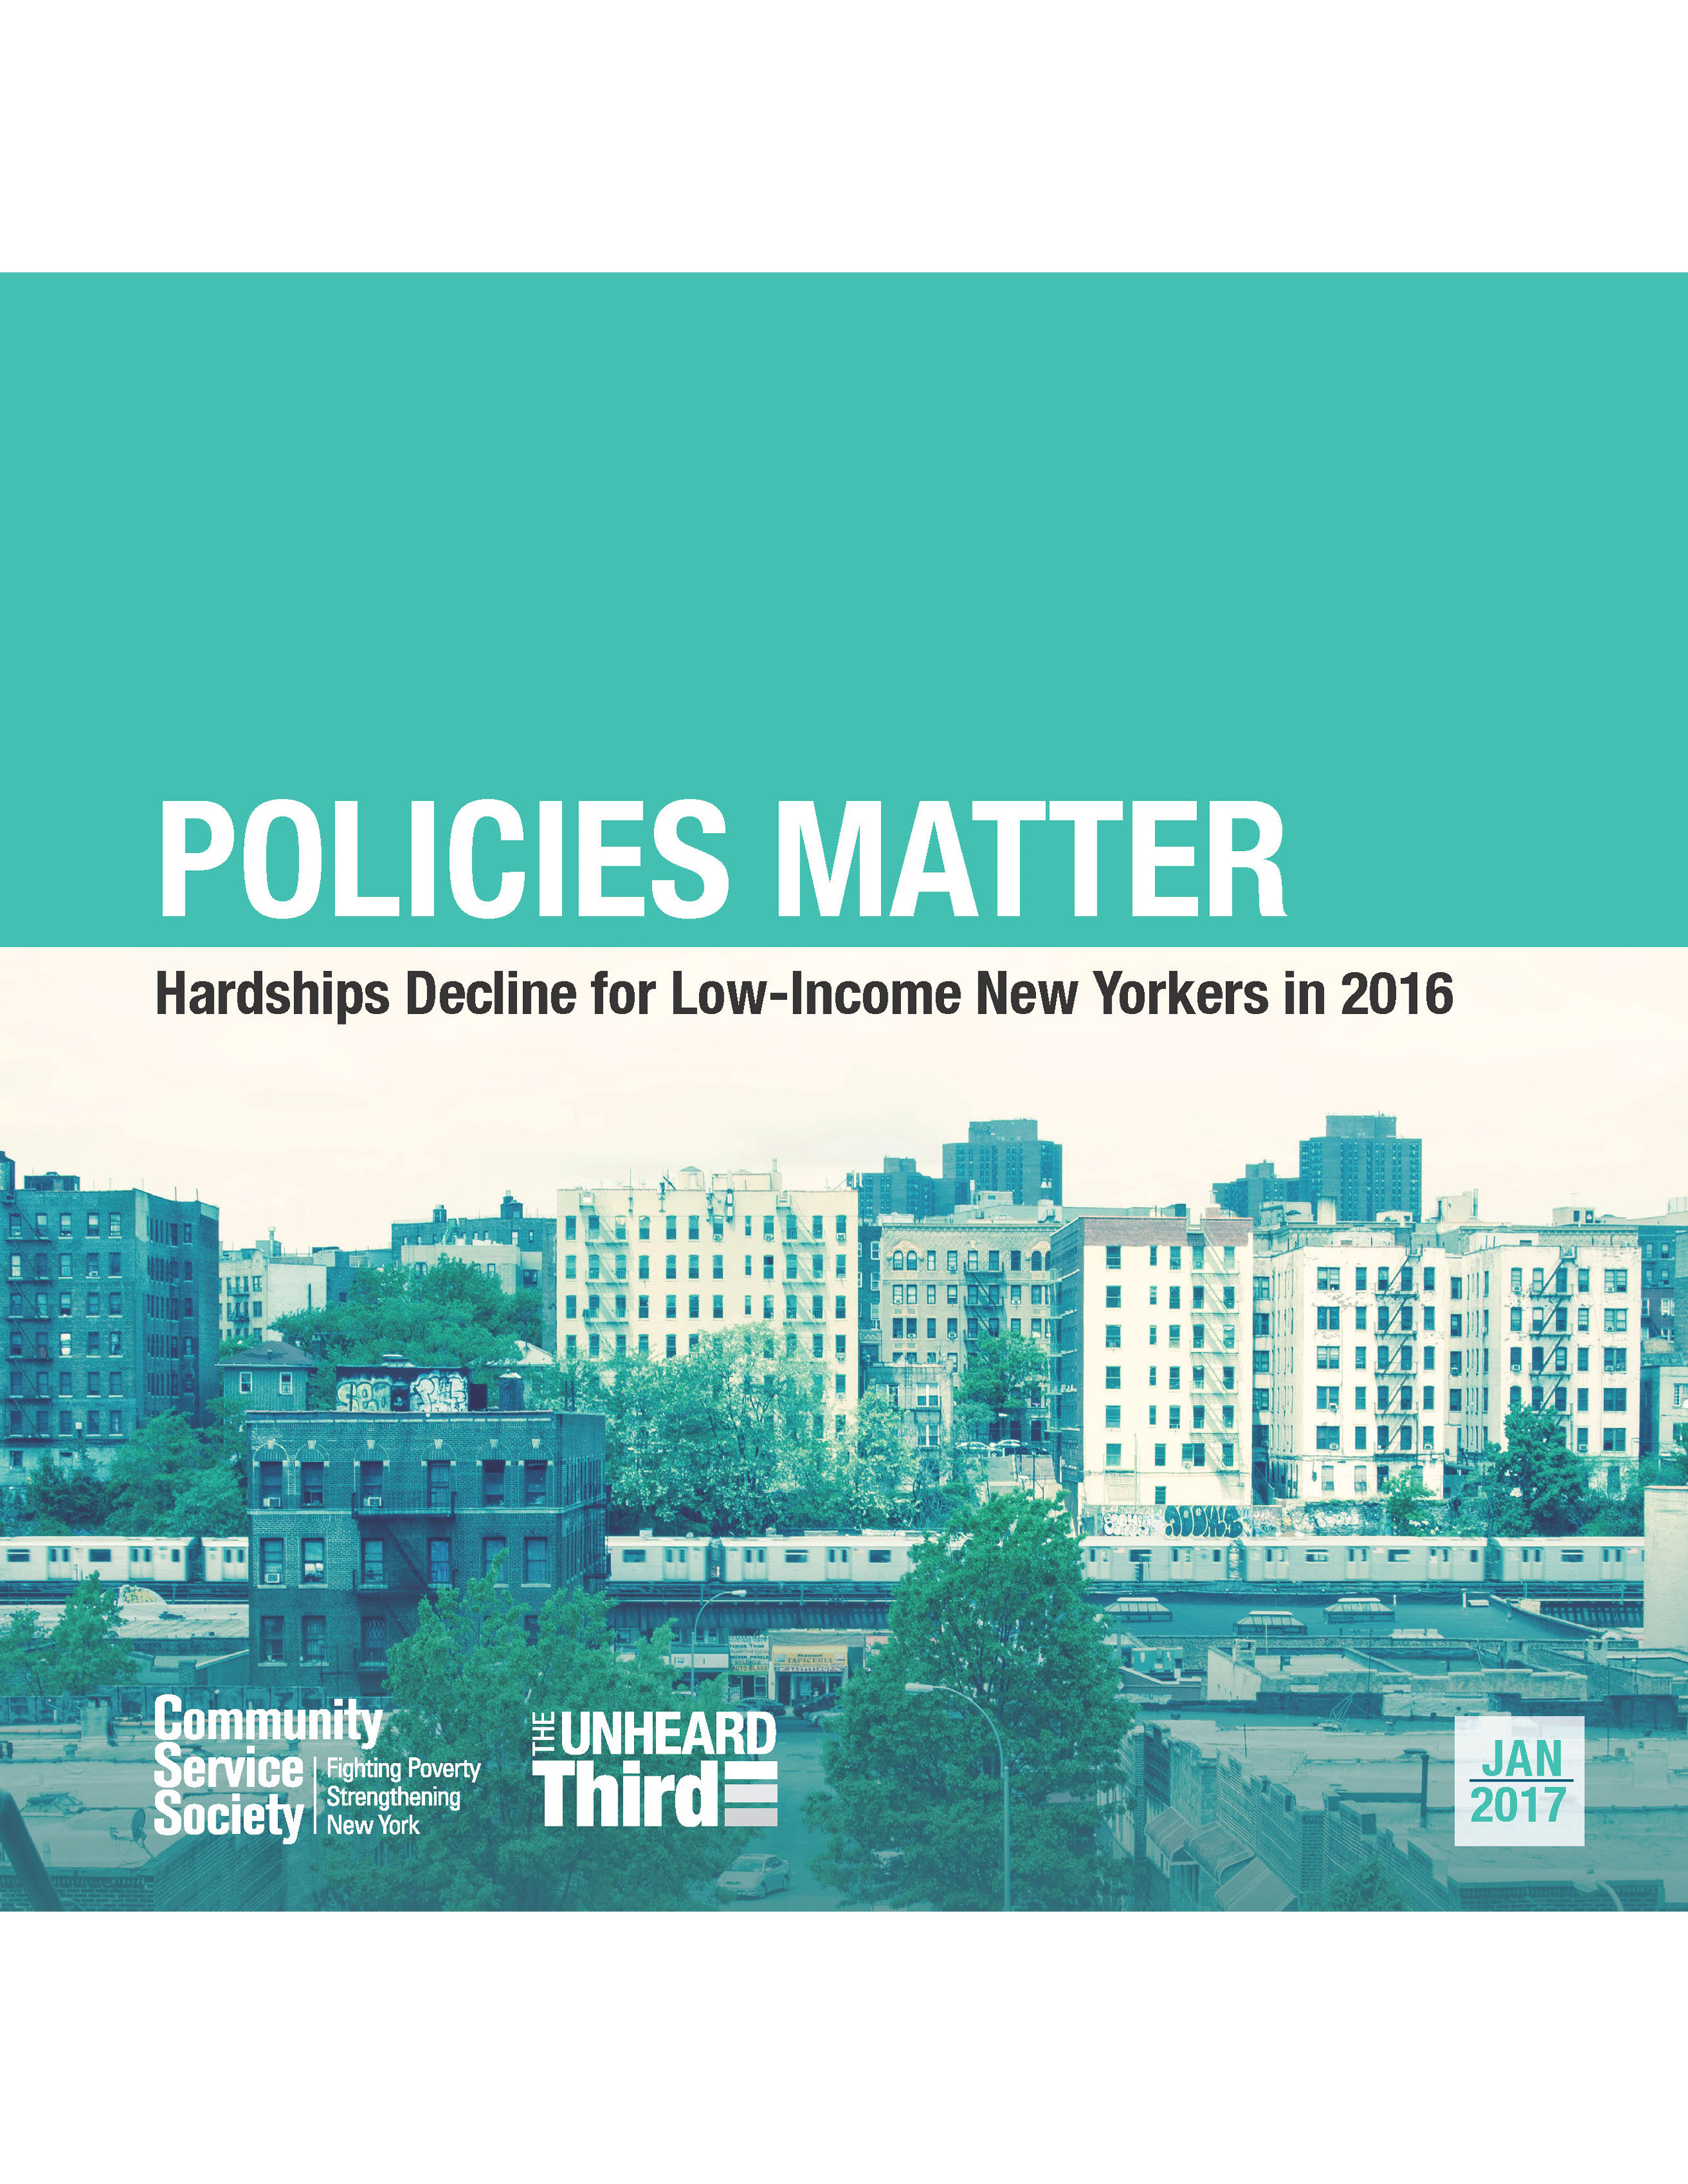 Policies Matter: Hardships Decline for Low-Income New Yorkers in 2016